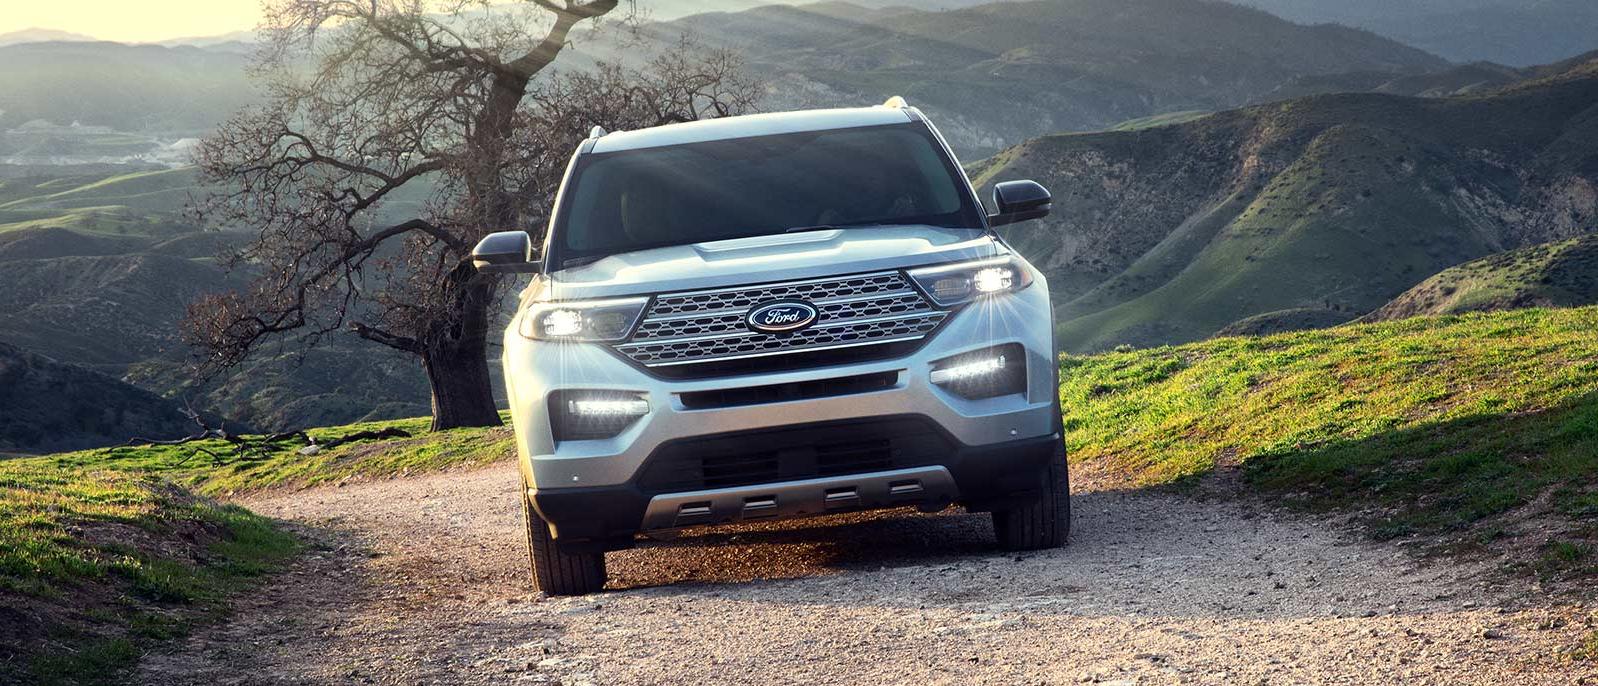 2022 Ford Explorer is parked in mountain range.